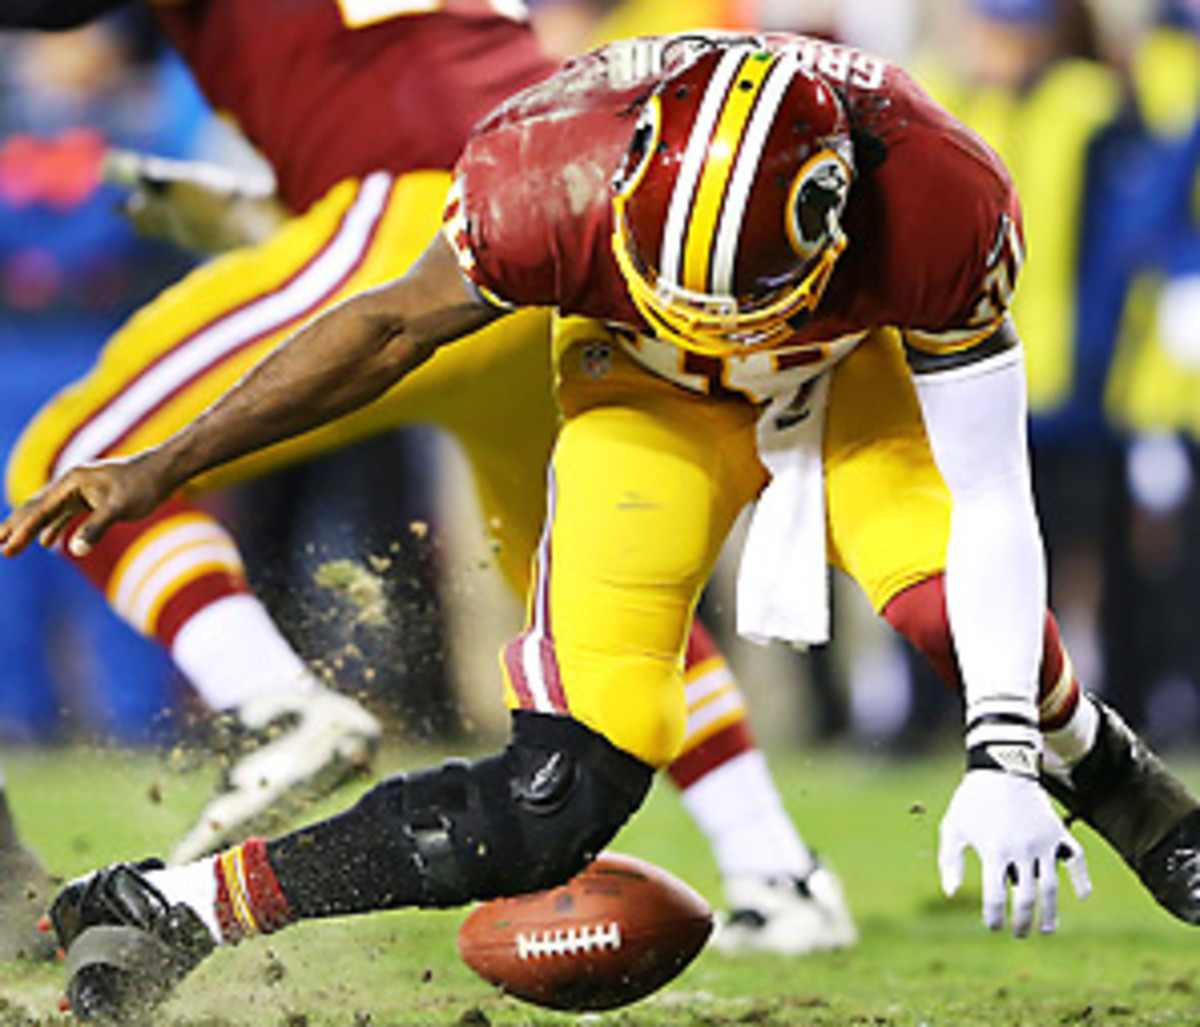 The entire crowd at FedEx Field went silent upon seeing Robert Griffin III's injury. (Al Bello/Getty Images)